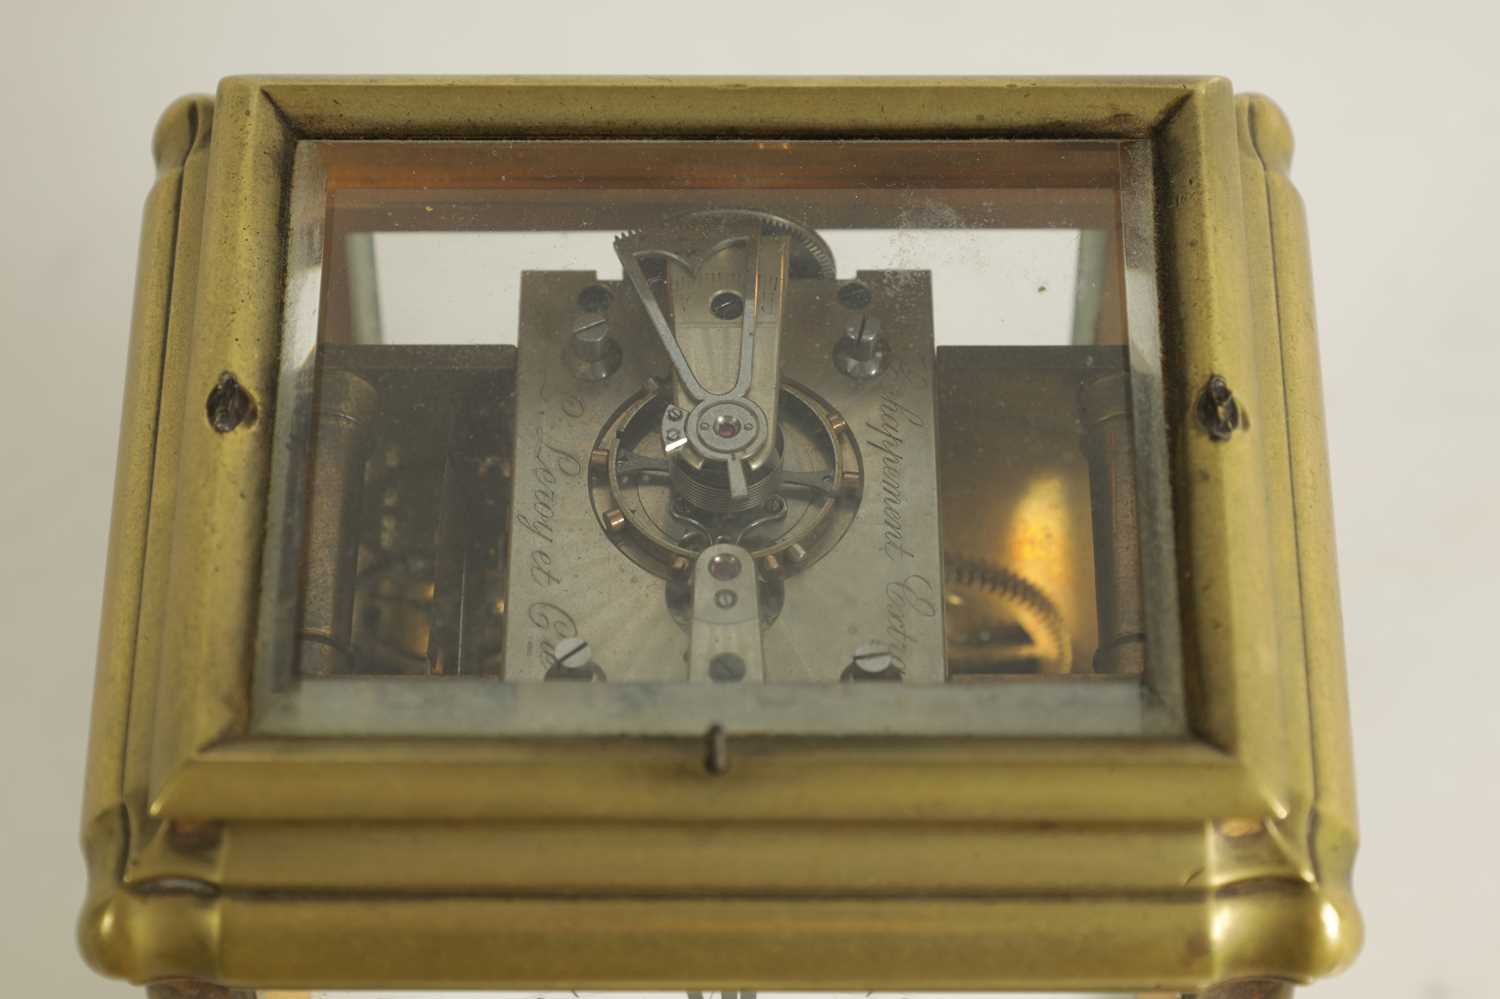 L. LEROY, PARIS. A LATE 19TH CENTURY REPEATING QUARTER CHIMING CARRIAGE CLOCK - Image 5 of 8